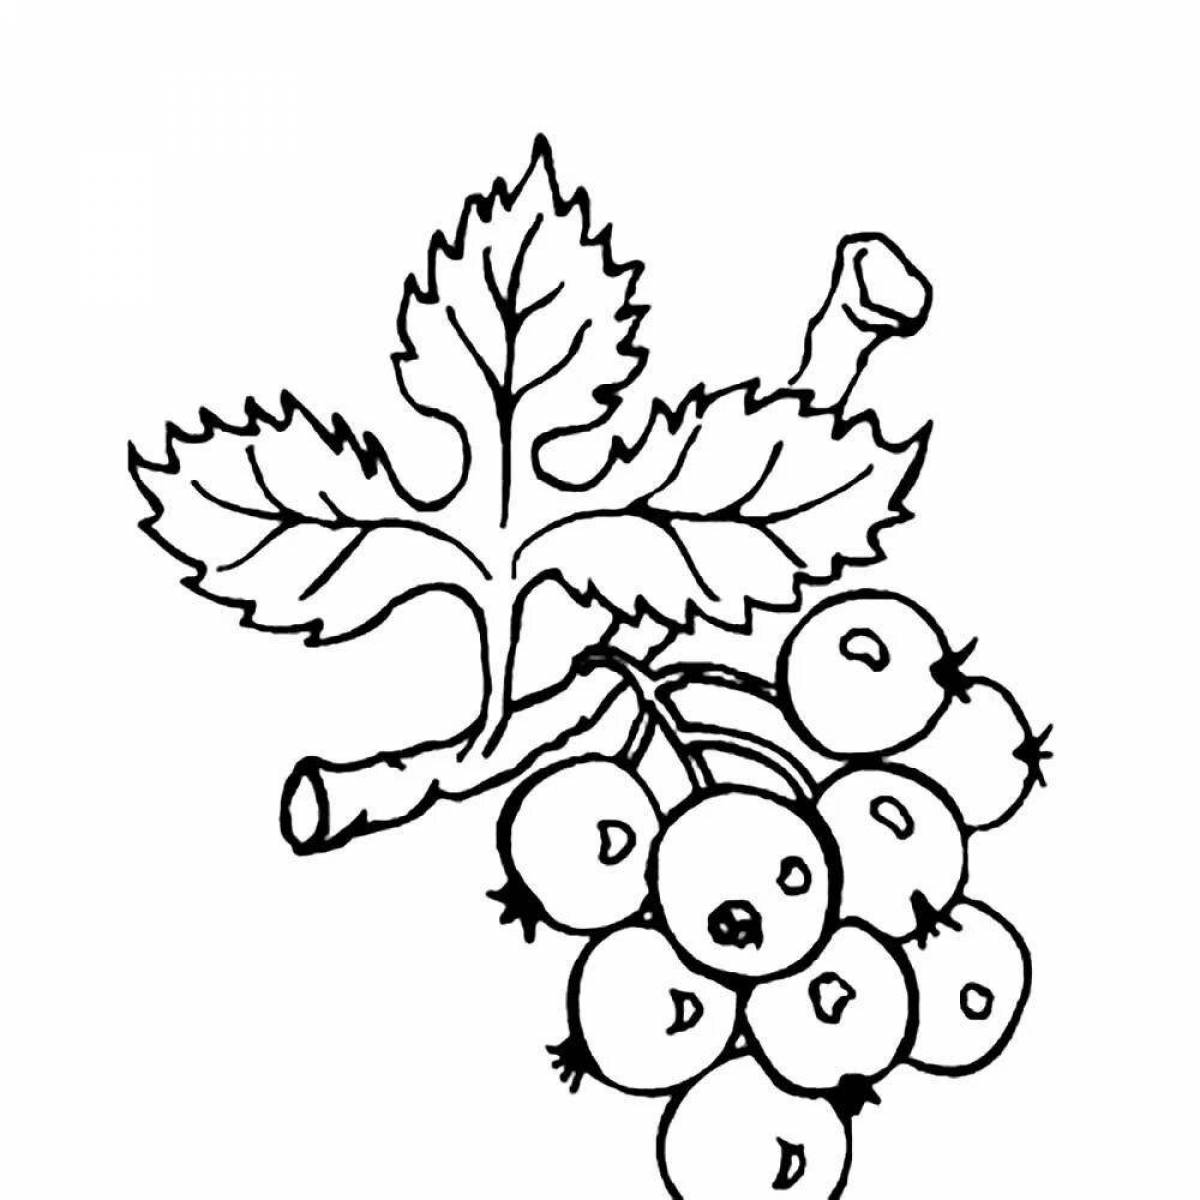 Amazing currant coloring page for schoolchildren